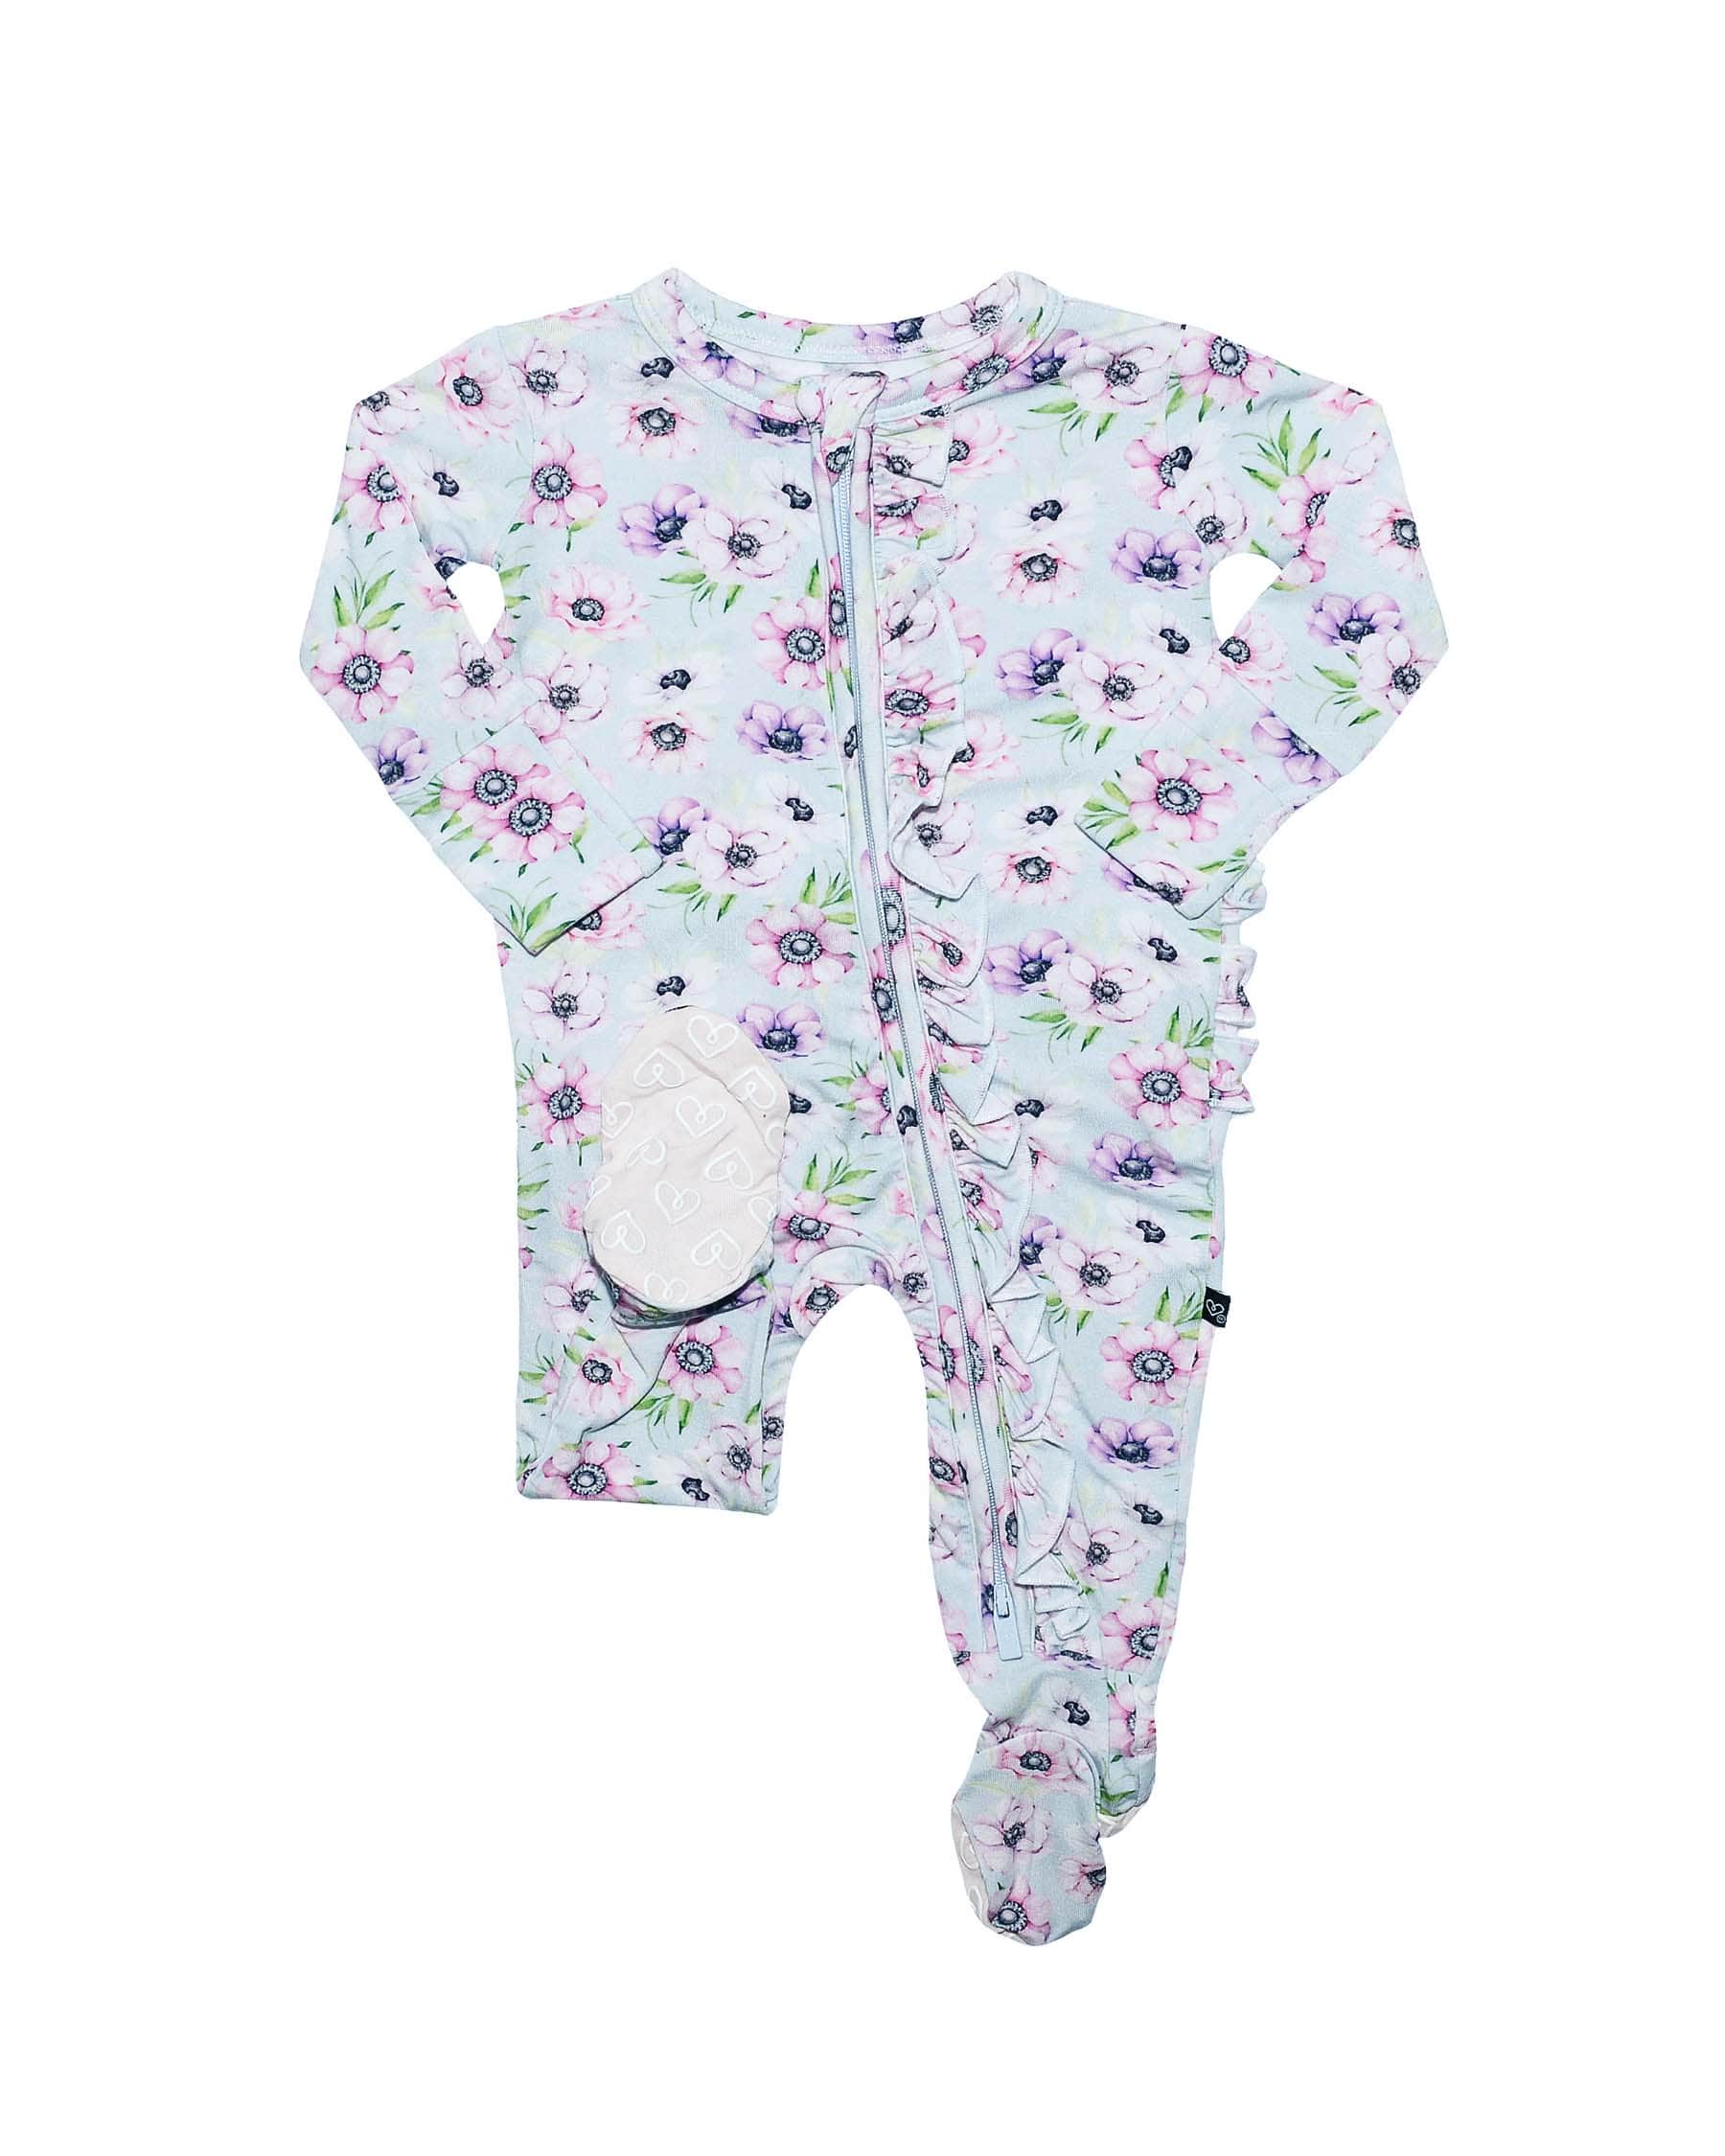 Lev Baby Ruffled Zippered Footie from Sienna collection